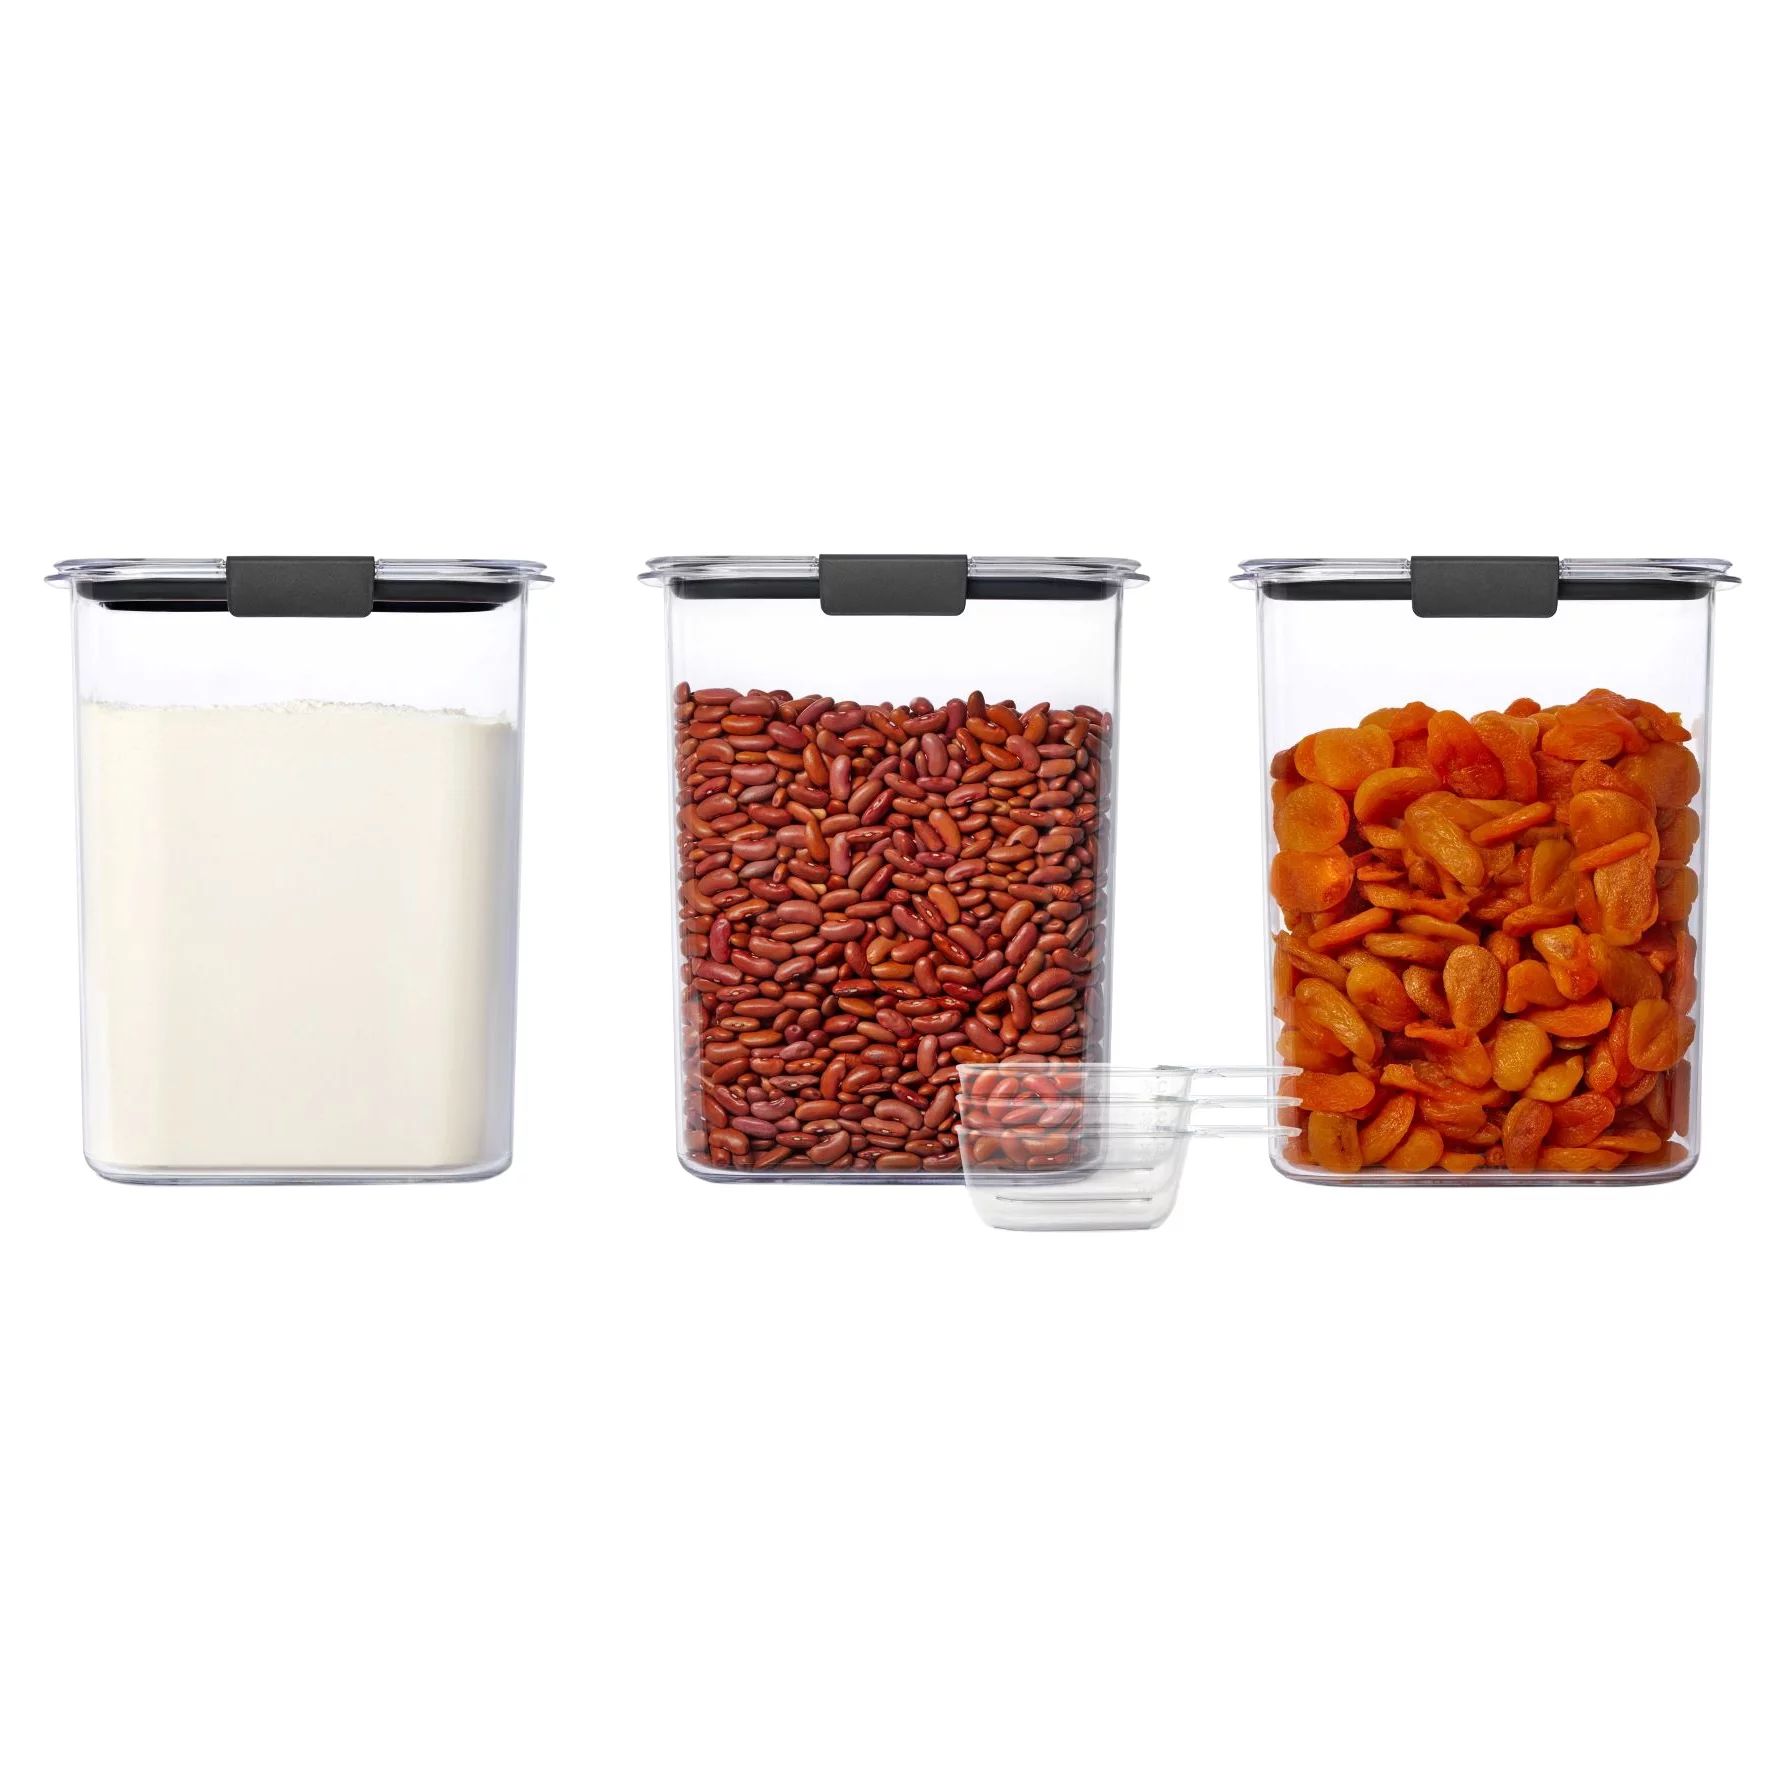 Rubbermaid Brilliance Pantry 3-Piece Set, Clear and Airtight Food and Pantry Storage Containers | Walmart (US)